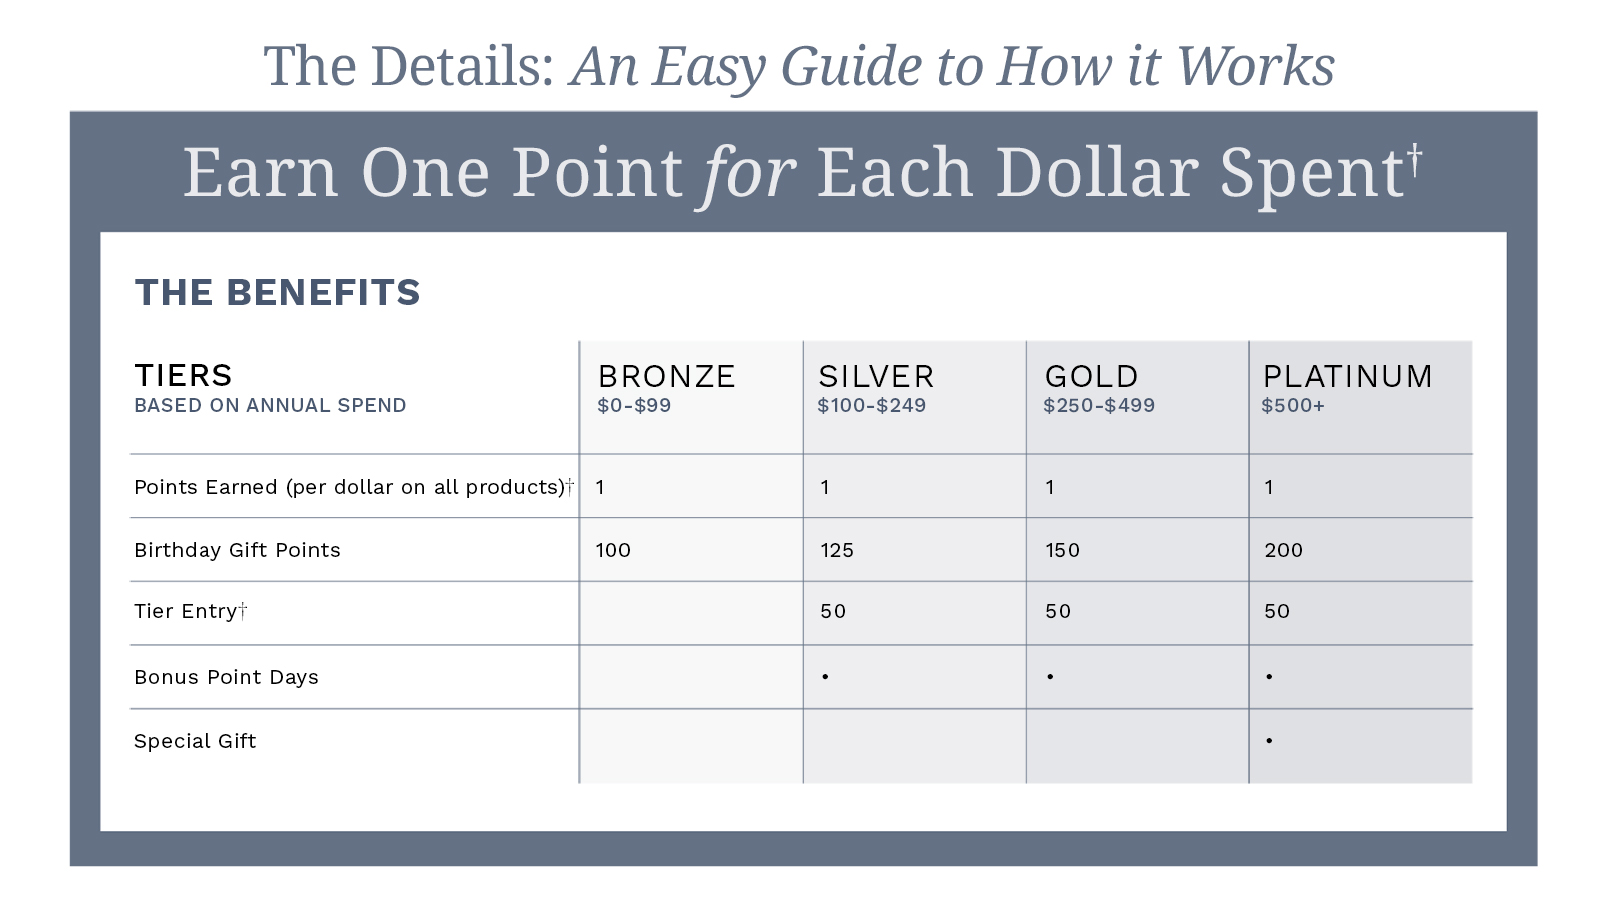 The Details: An easy guide to how it works. Earn One Point for Each Dollar.† The Benefits: Tiers are based on annual spend. Bronze Tier: spend between $0-$99. Silver Tier: spend between $100-$249. Gold Tier: spend between $250-$499. Platinum Tier: spend over $500. Points Earned (per dollar on all products)†. One for each tier (Bronze, Silver, Gold, & Platinum). Birthday Gift Points: 100 Bronze, 125 Silver, 150 Gold, & 200 Platinum. Tier Entry:† 50 Silver, 50 Gold, & 50 Platinum. Bonus Point Days for Silver, Gold, & Platinum. Special Gift for Platinum.